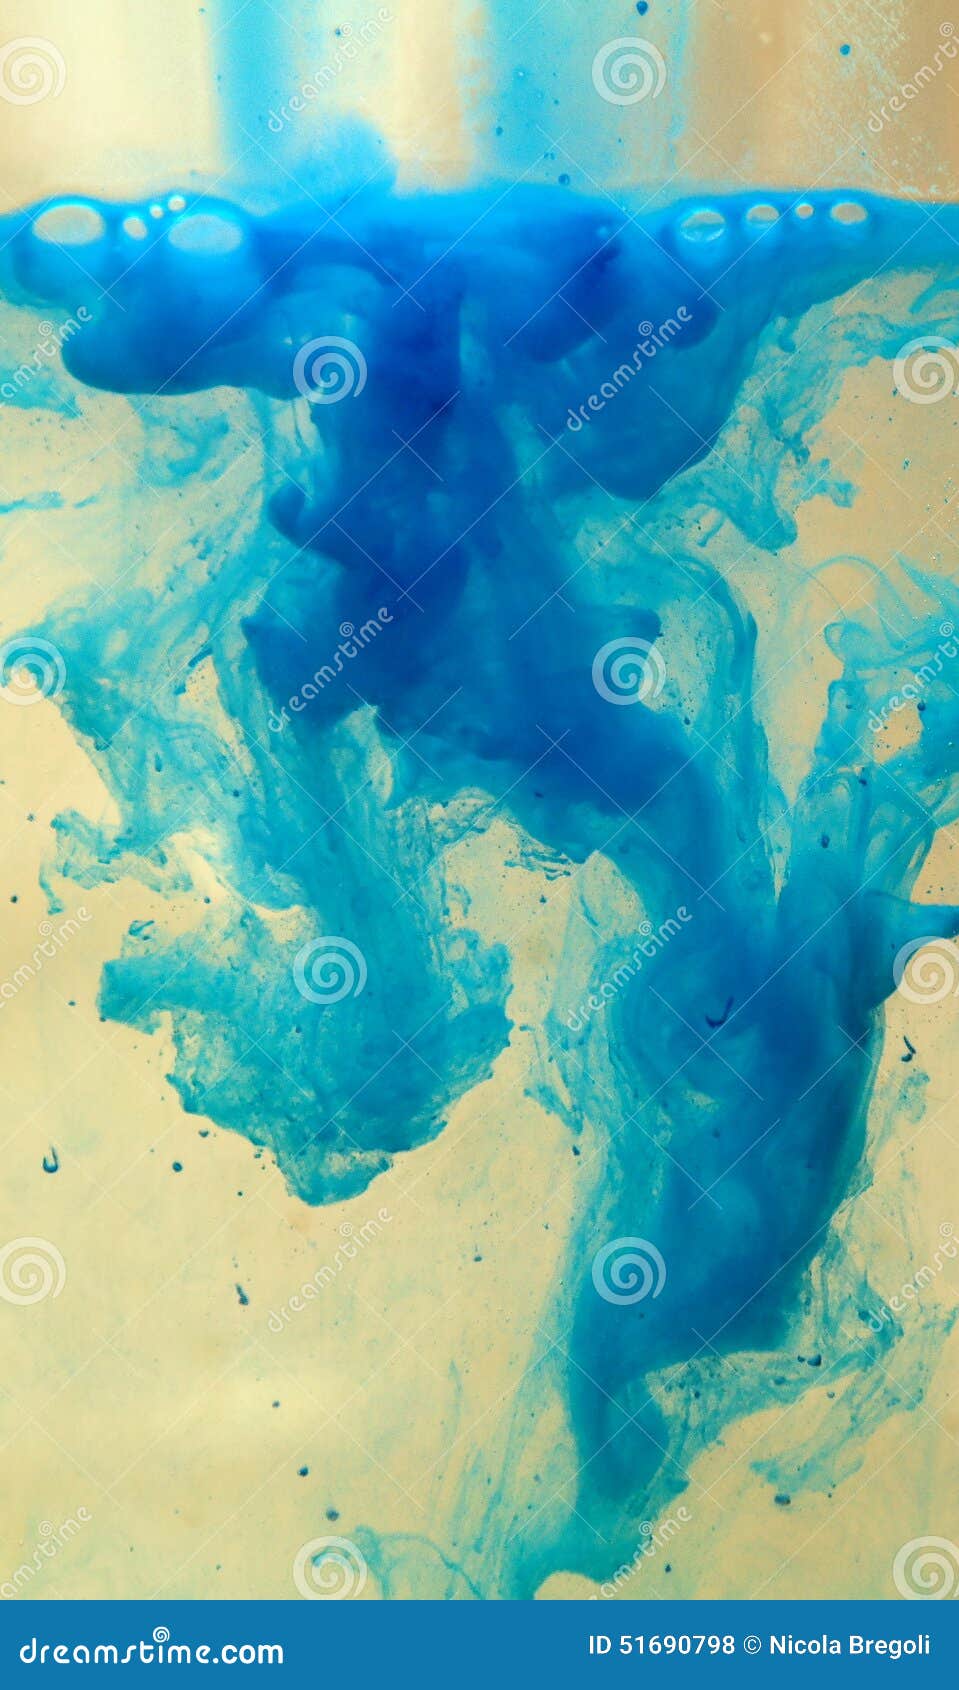 Liquid colors stock photo. Image of organism, water, clouds - 51690798